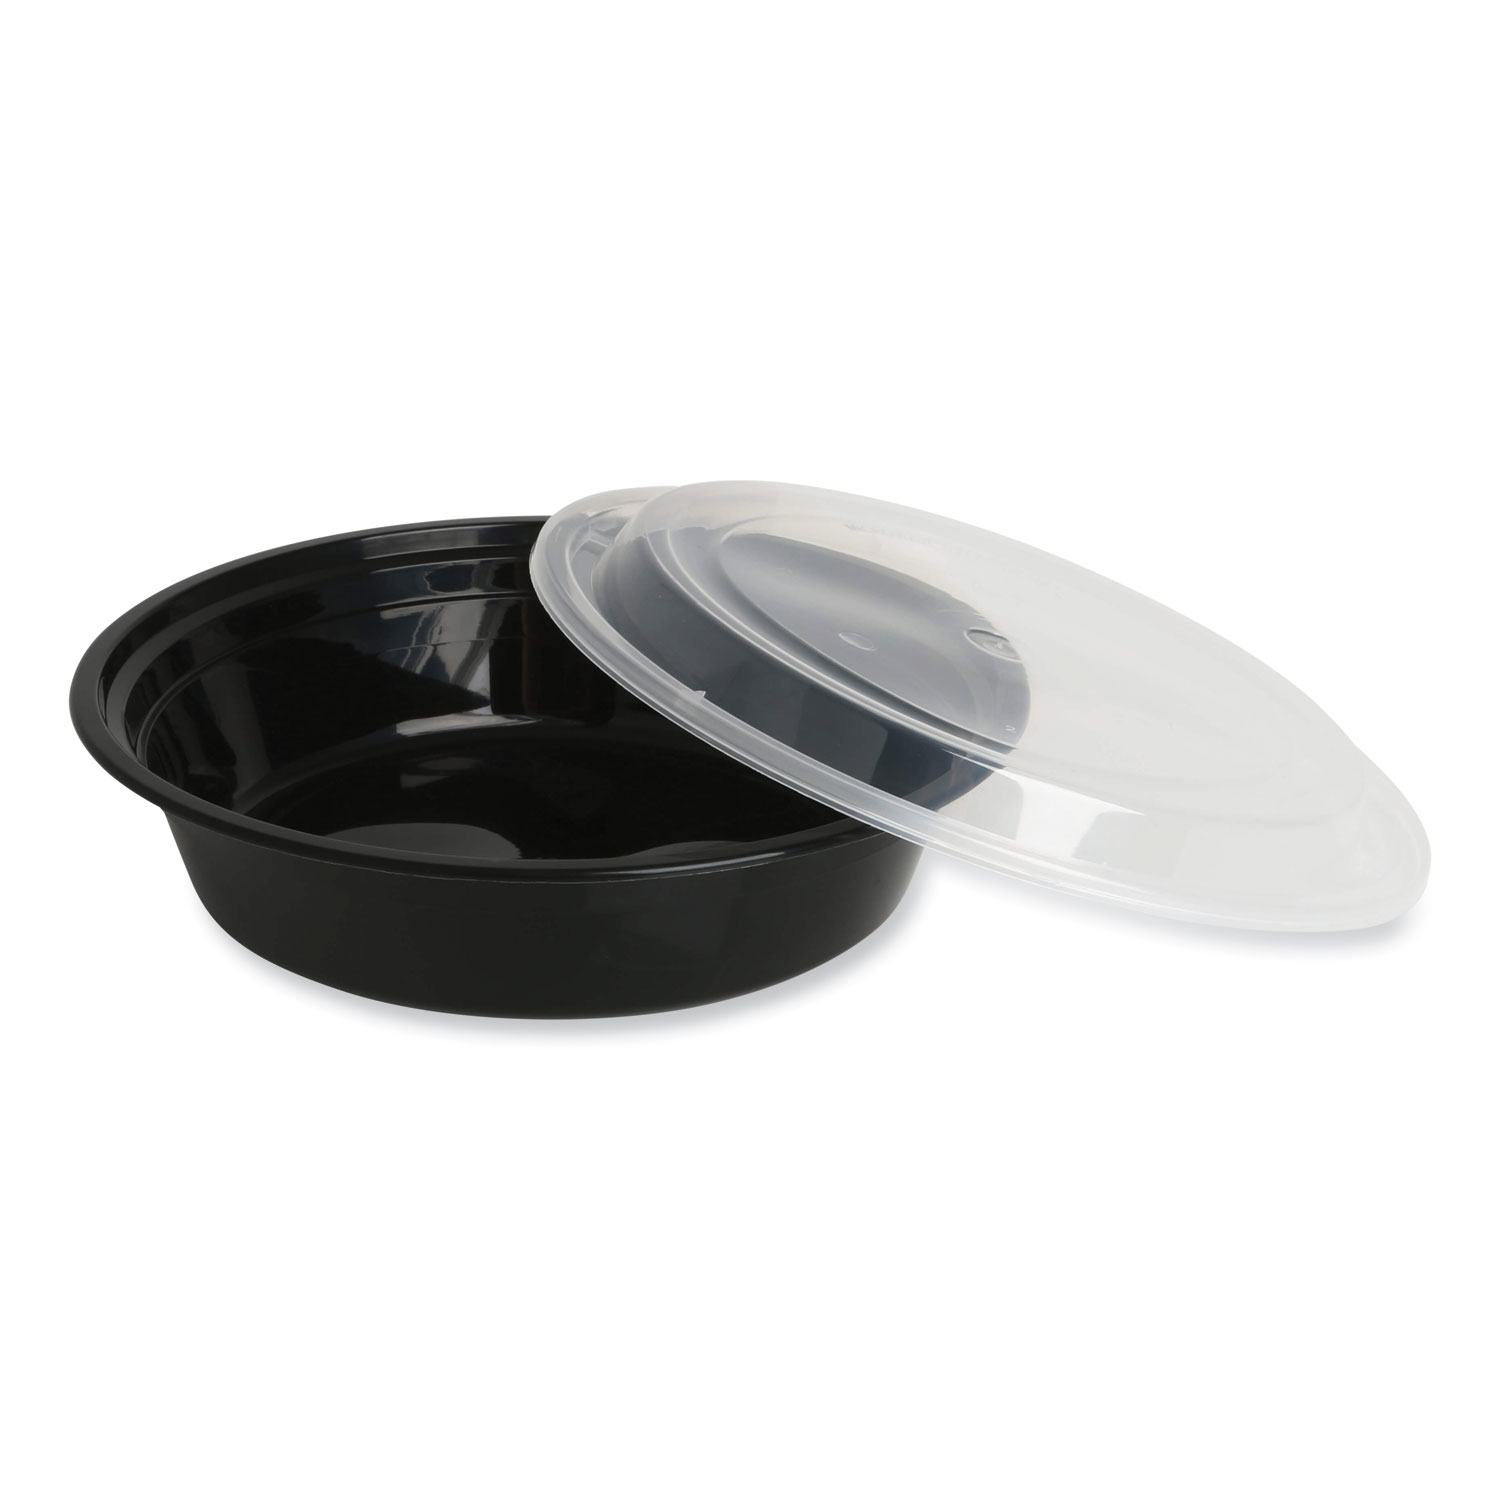 16oz Black Disposable Plastic Round Microwavable Food Container